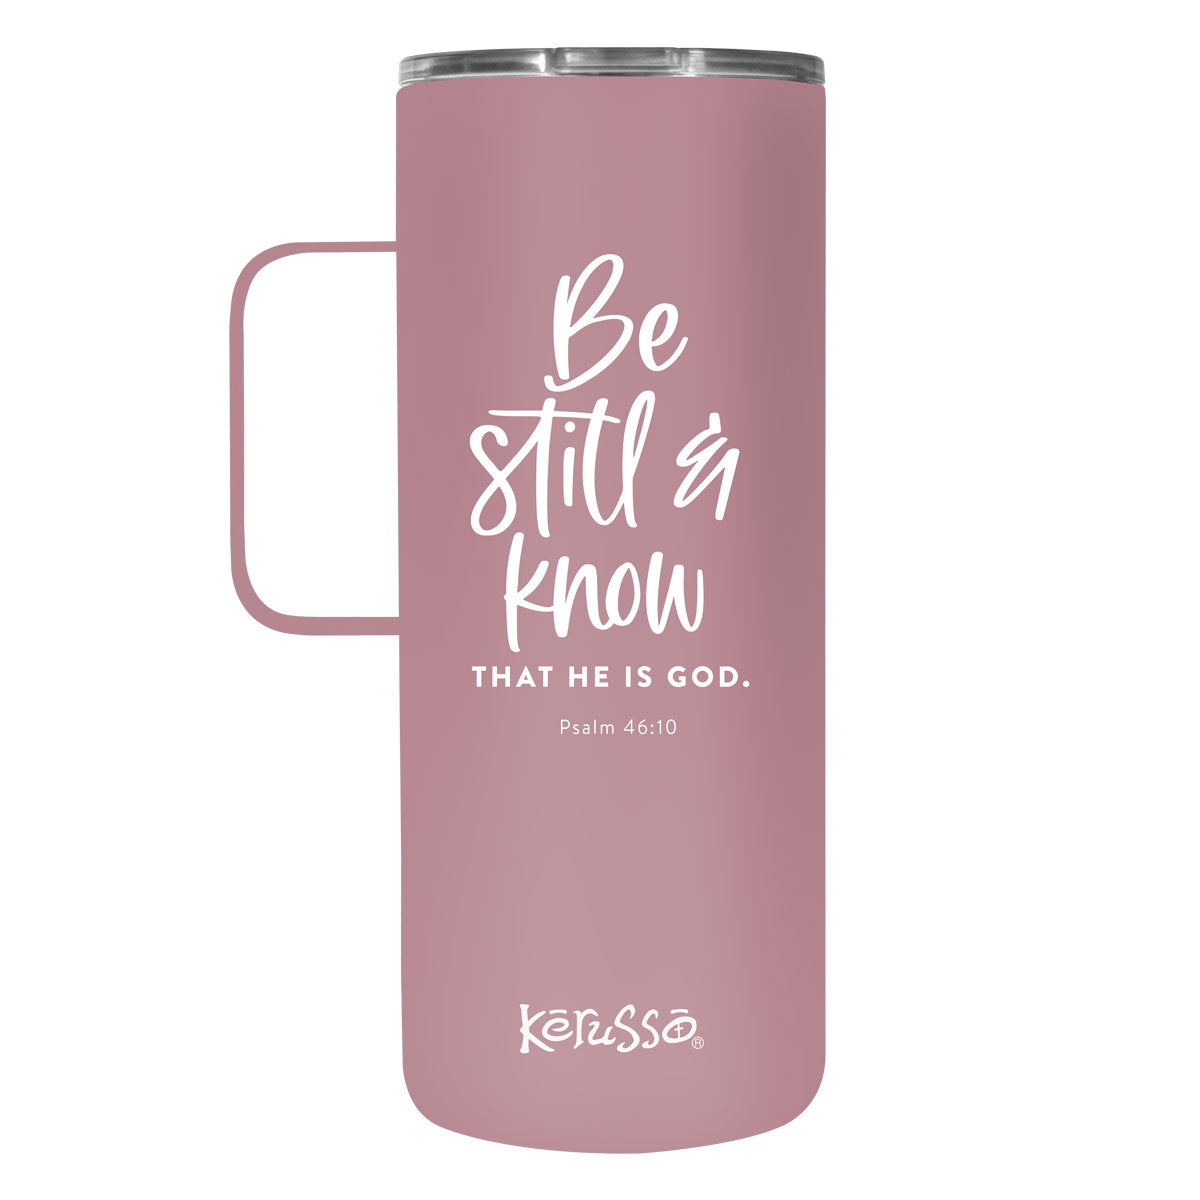 Kerusso 22 oz Stainless Steel Mug With Handle Be Still & Know